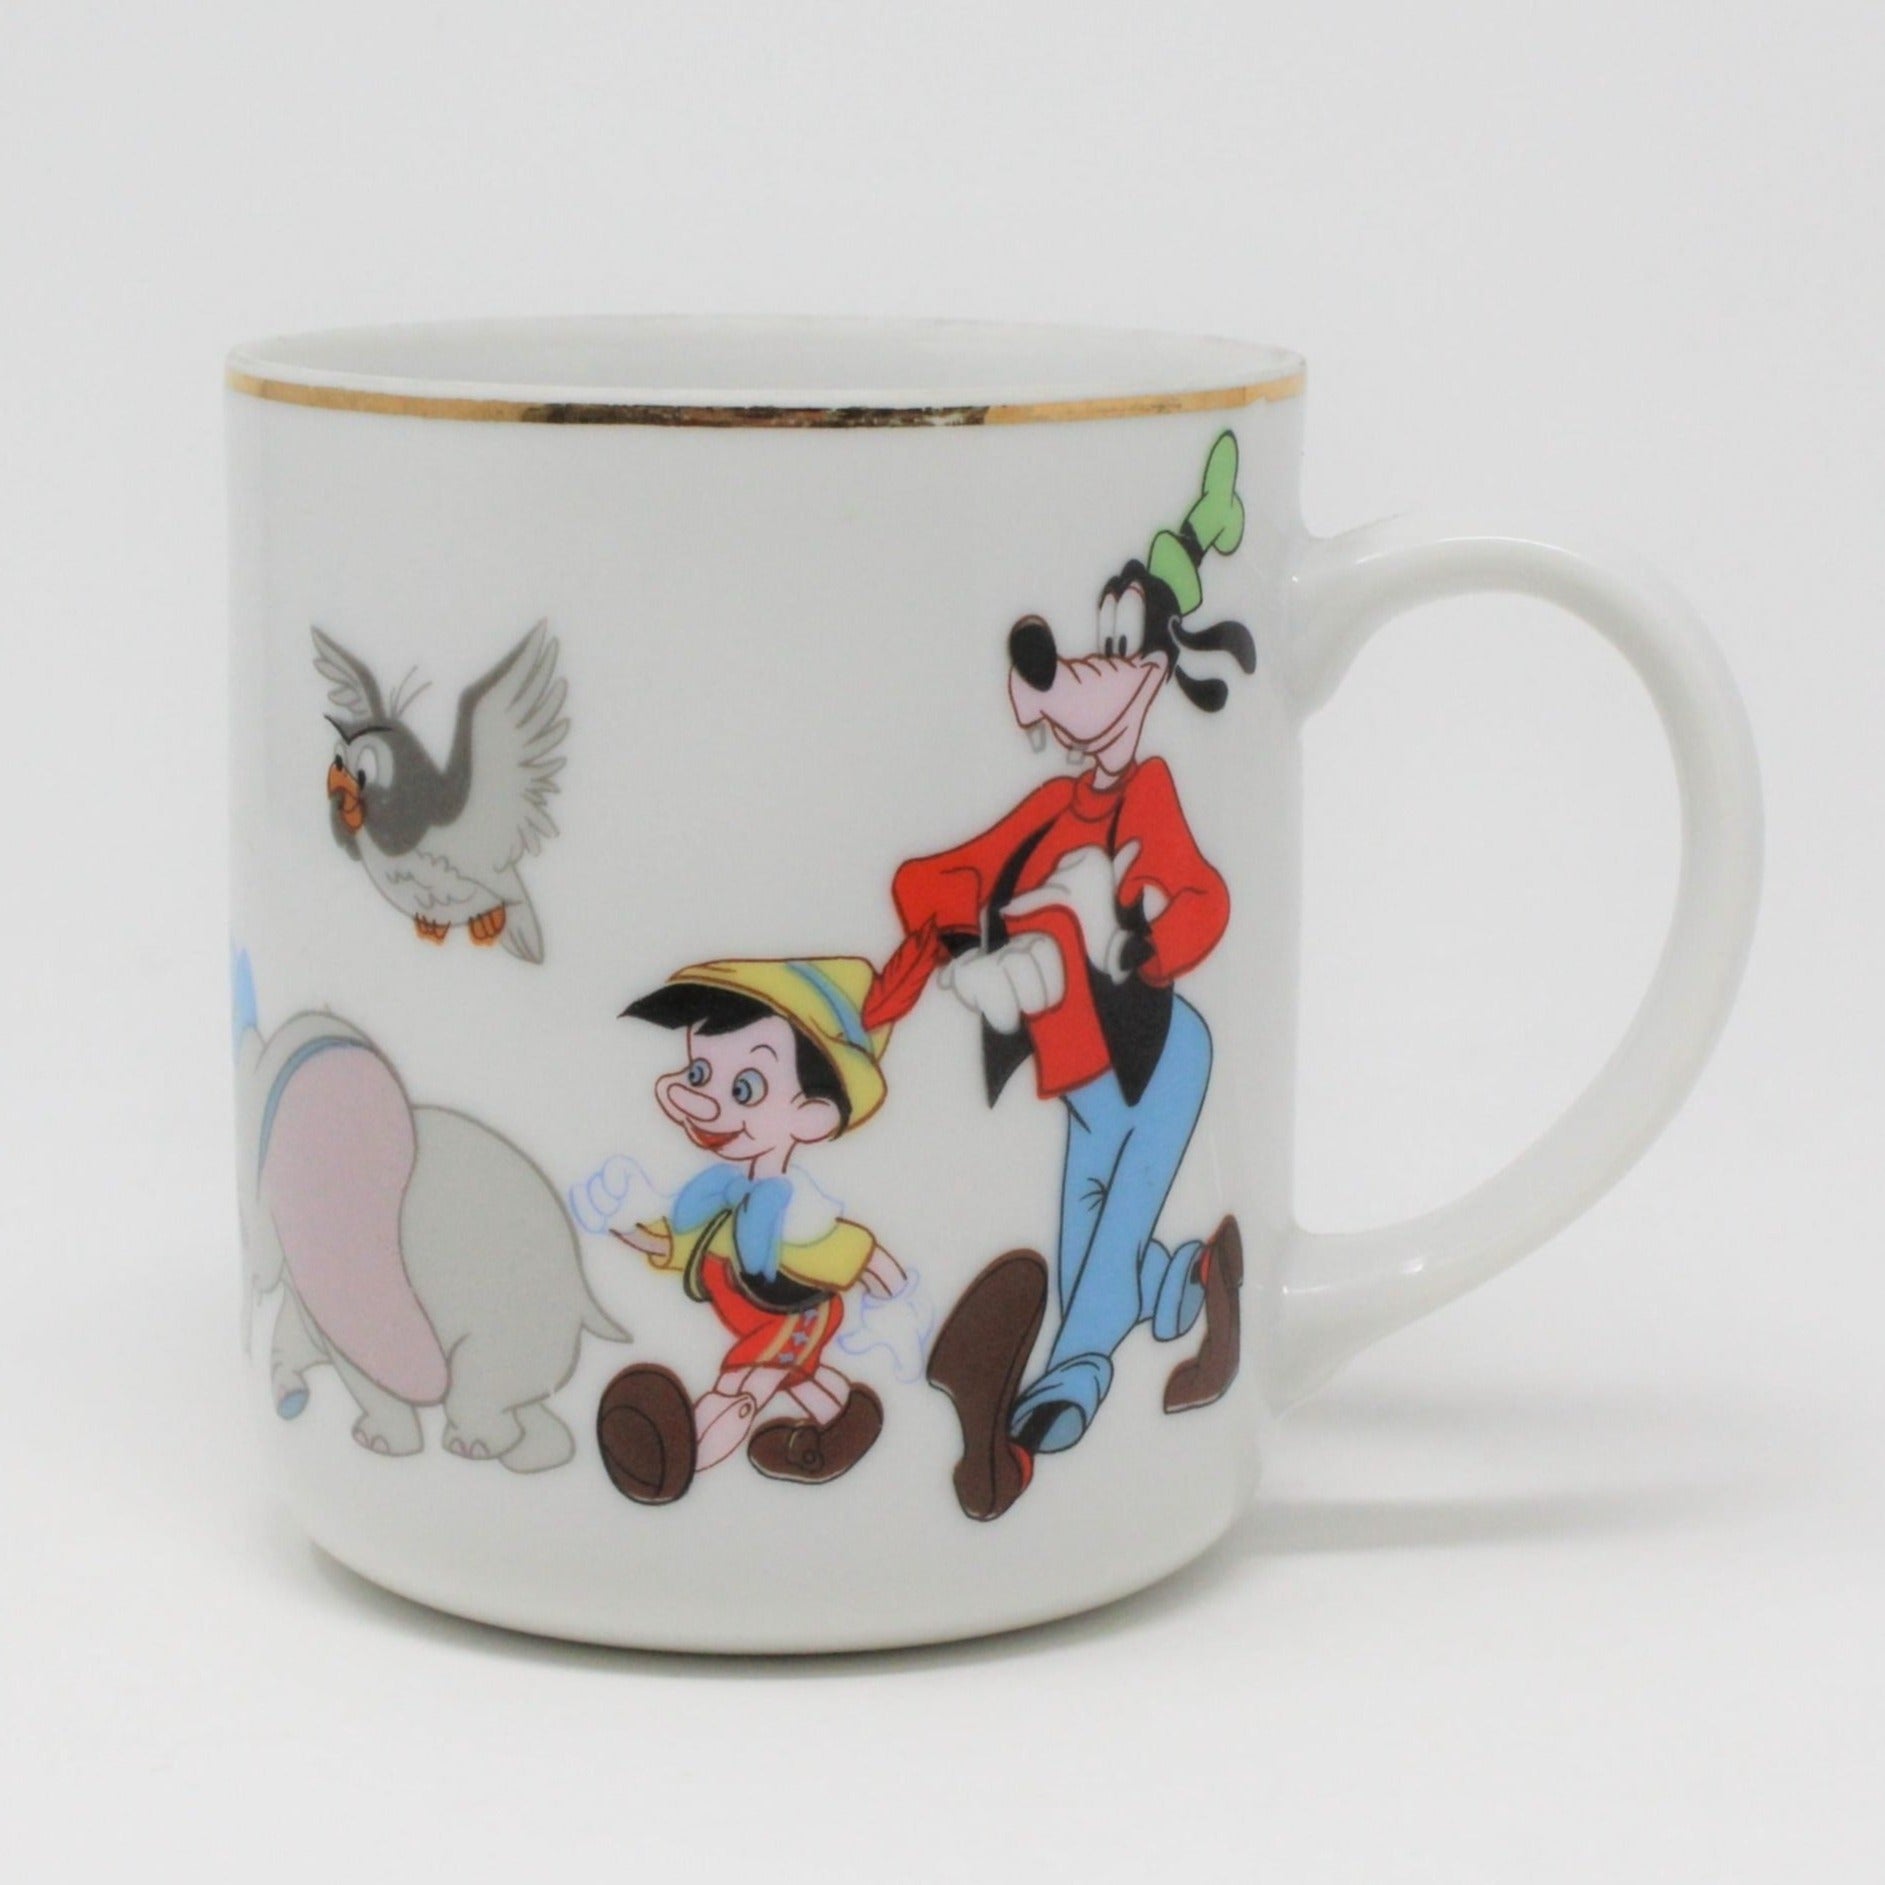 Mickey Mouse, Footed Mug, Walt Disney Productions, Made in Japan 